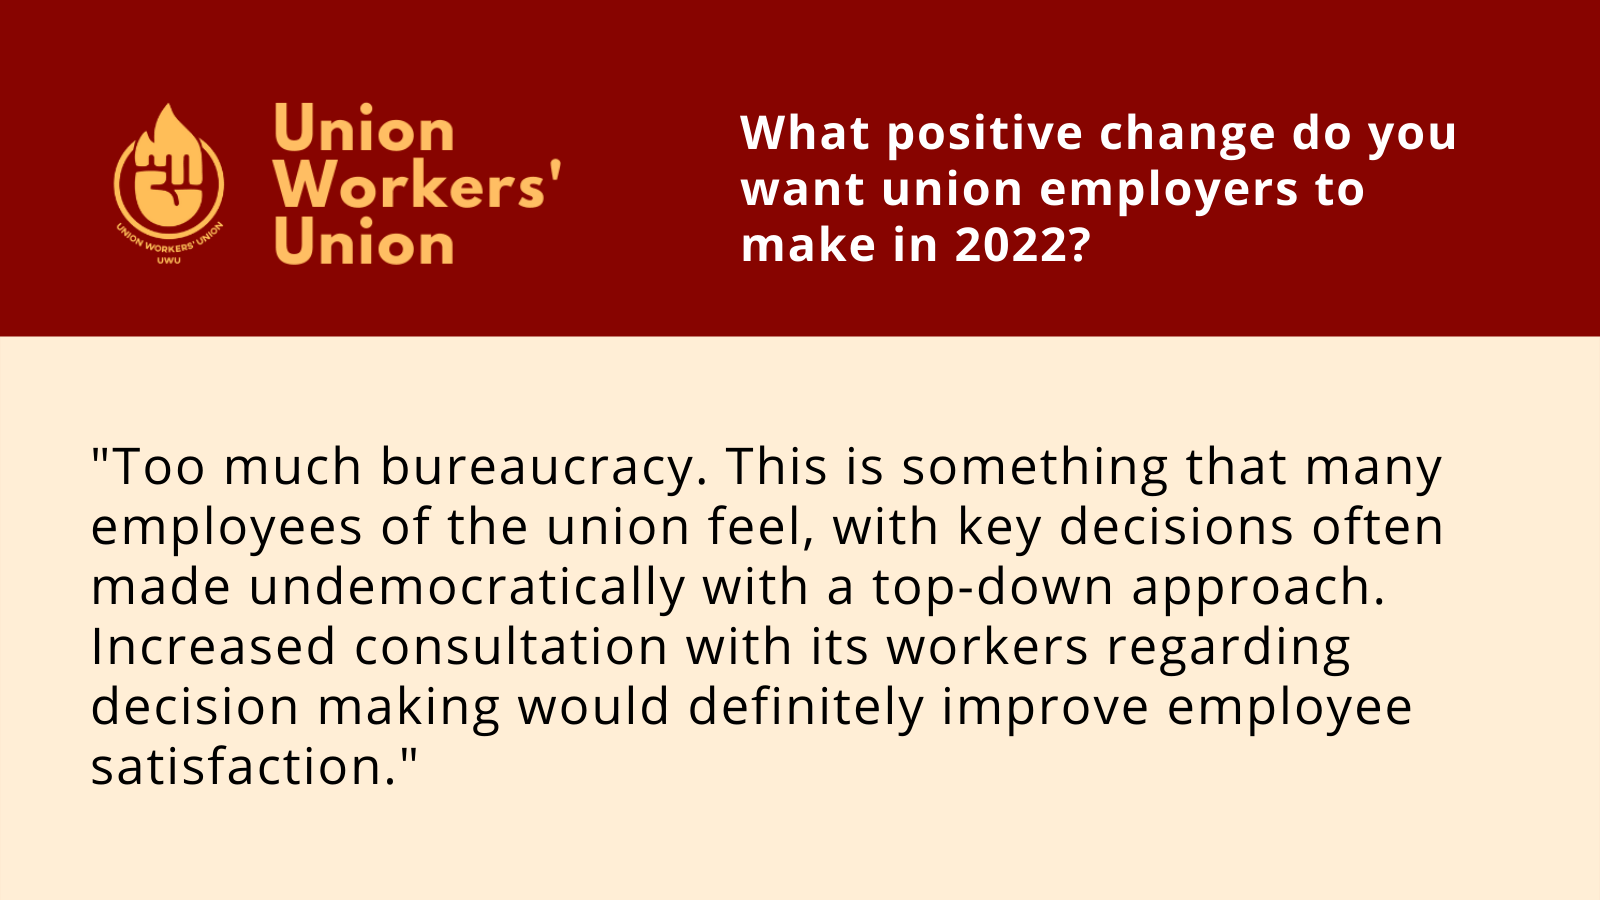 UWU logo with question, what positive change do you want union employers to make in 2022? Member response: Too much bureaucracy. This is something that many employees of the union feel, with key decisions often made undemocratically with a top-down approach. Increased consultation with its workers regarding decision making would definitely improve employee satisfaction.